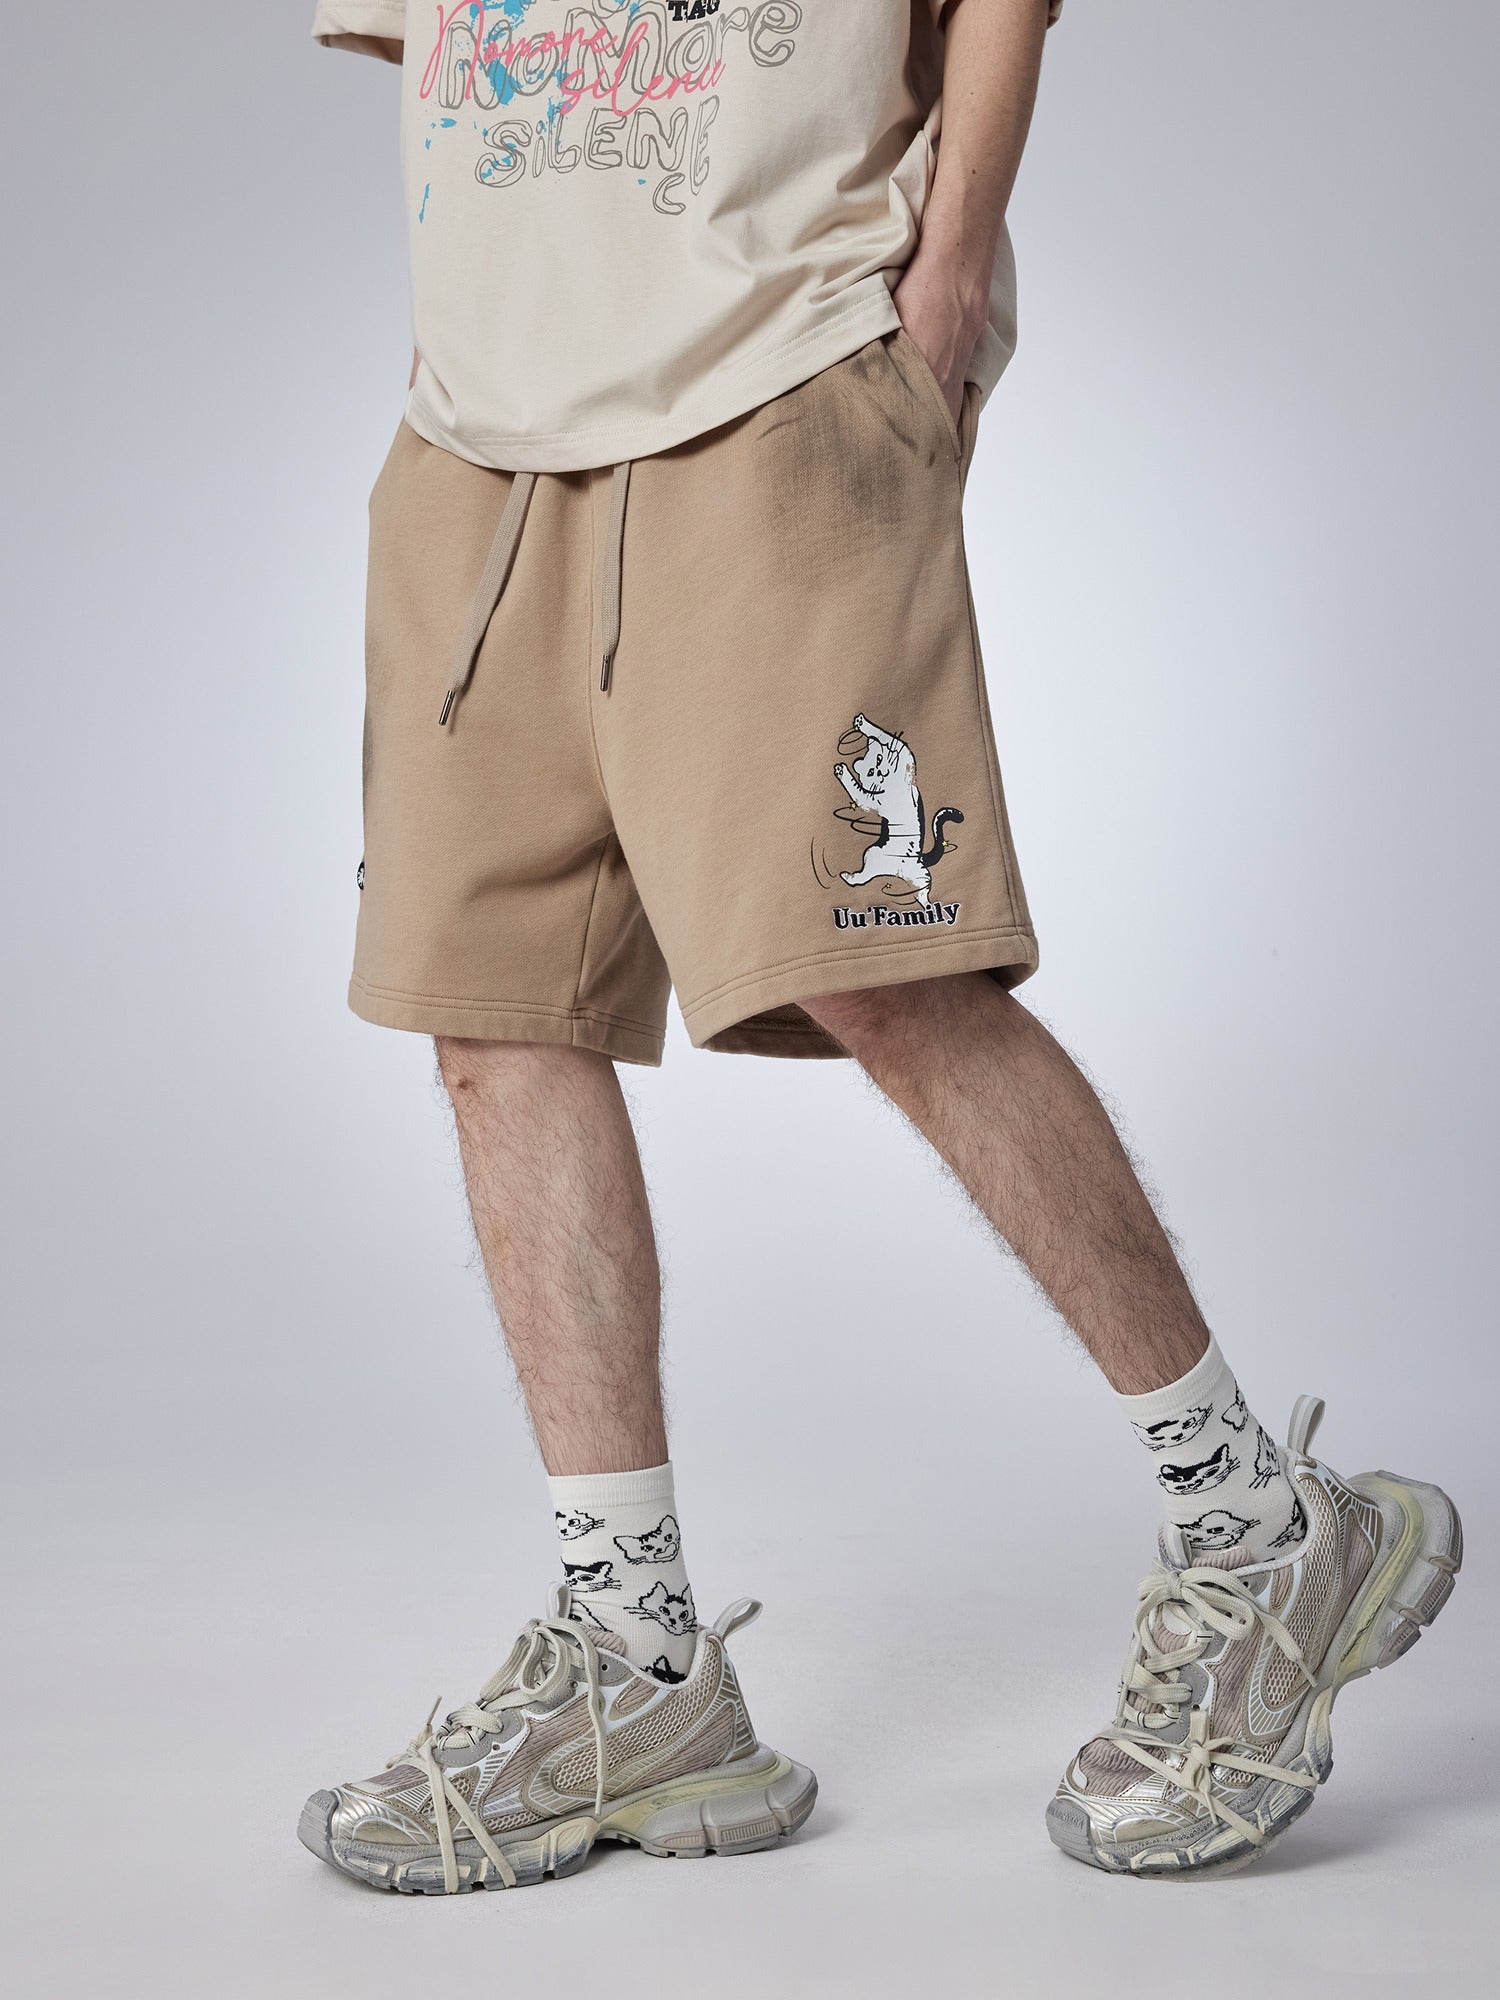 Rock summer style with these khaki cat-cropped shorts! Cool, comfortable, and perfect for everyday wear.